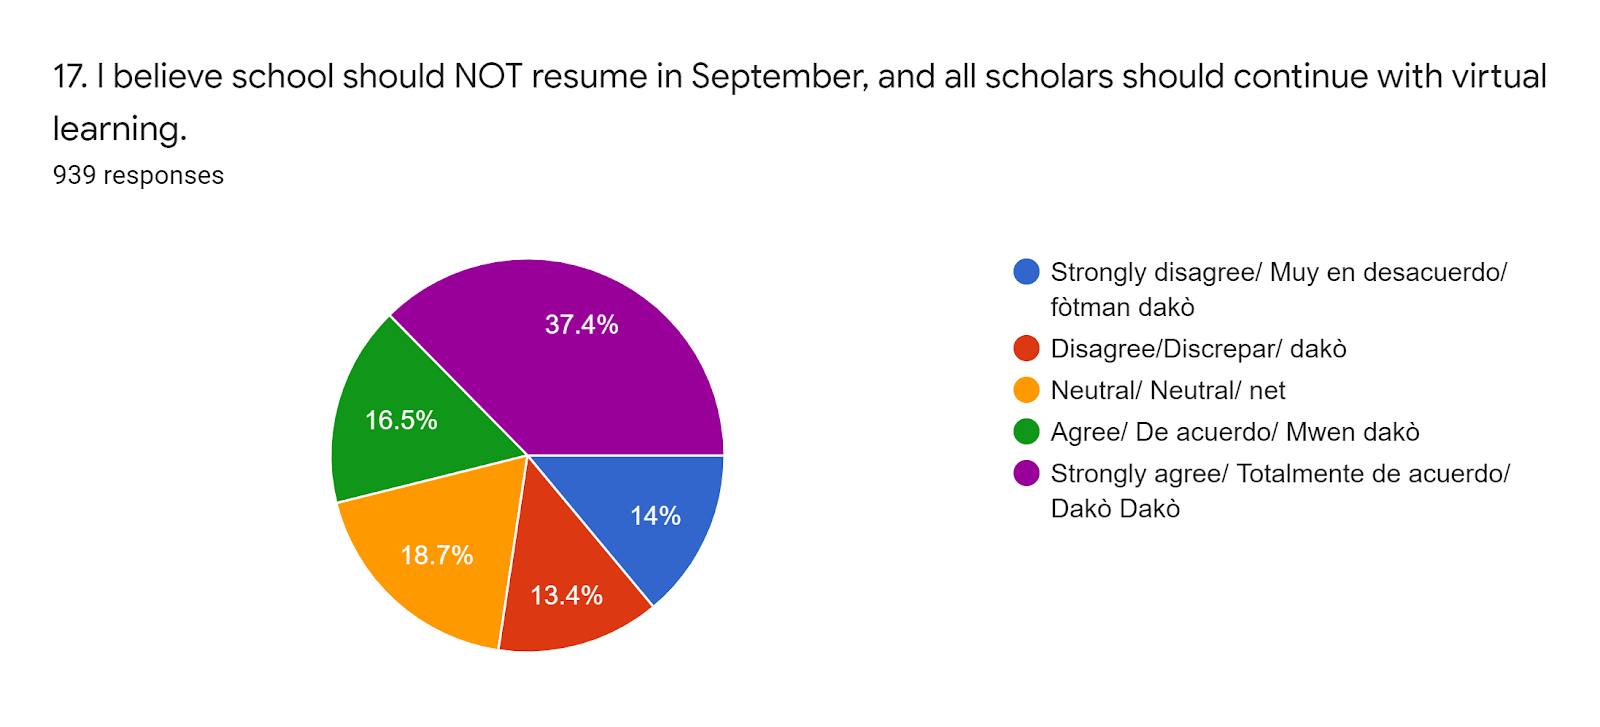 Forms response chart. Question title: 17. I believe school should NOT resume in September, and all scholars should continue with virtual learning. . Number of responses: 939 responses.